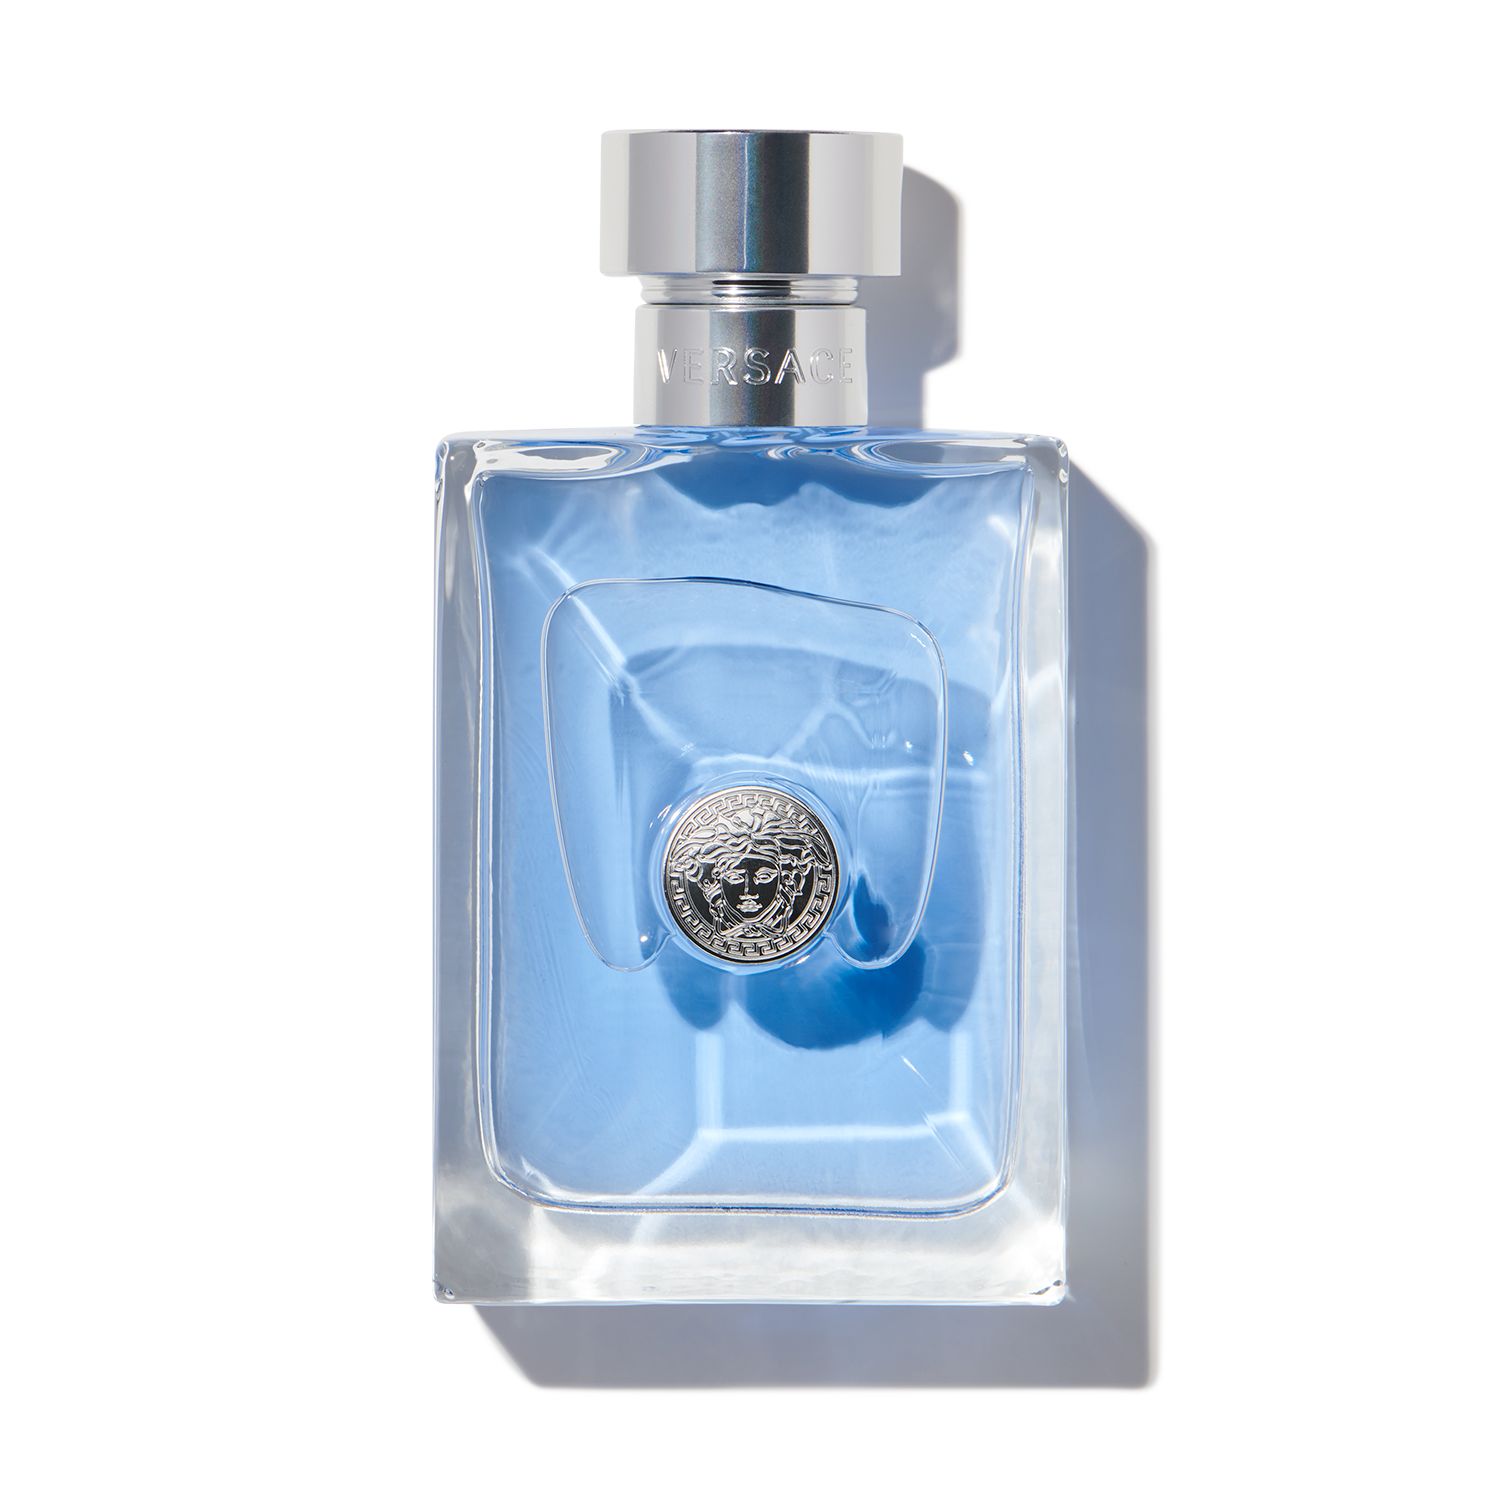 Score VERSACE Pour Homme EDT at Scentbird for $16.95